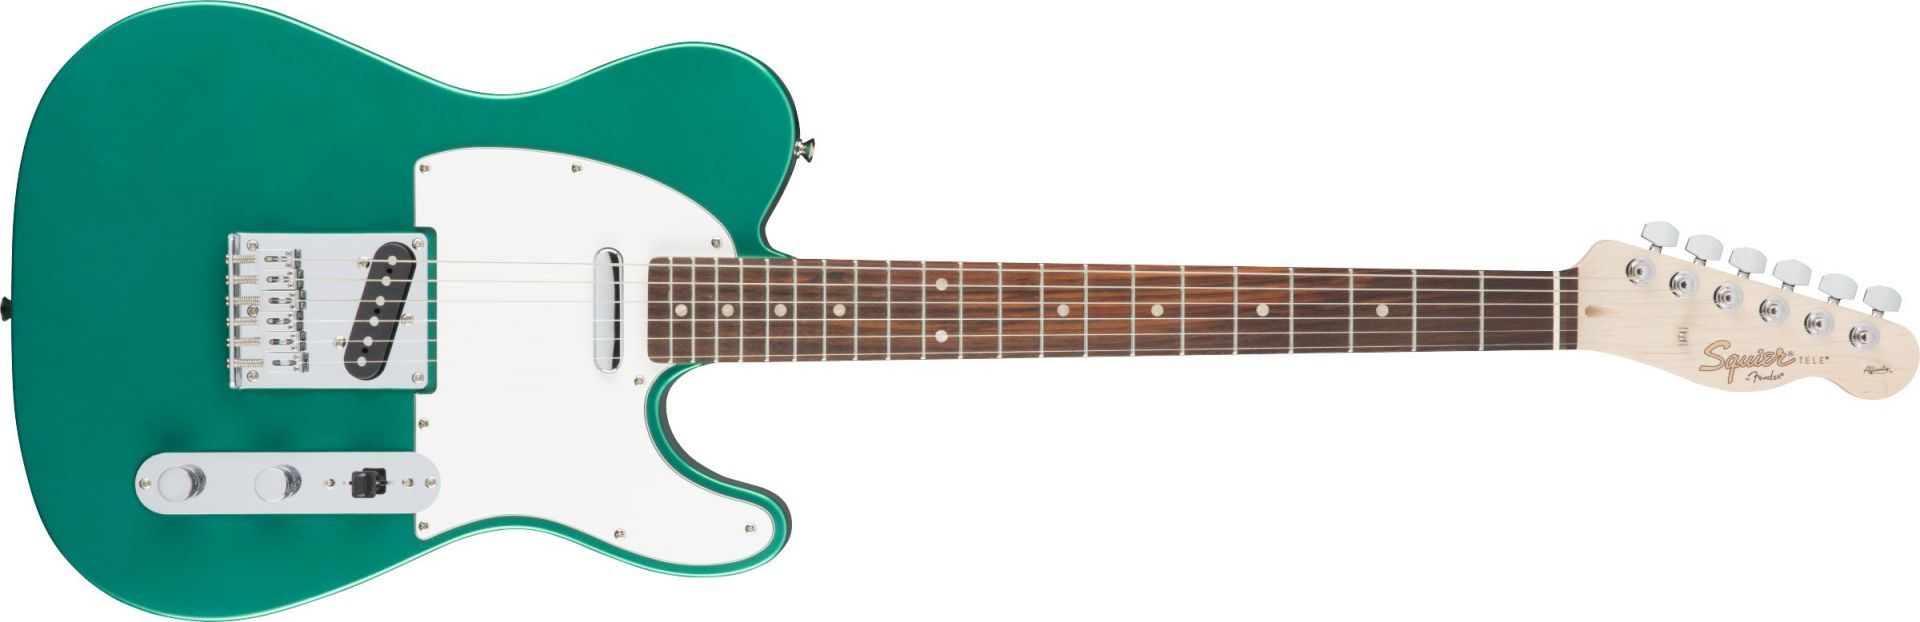 Squier Affinity Series Telecaster Race Green